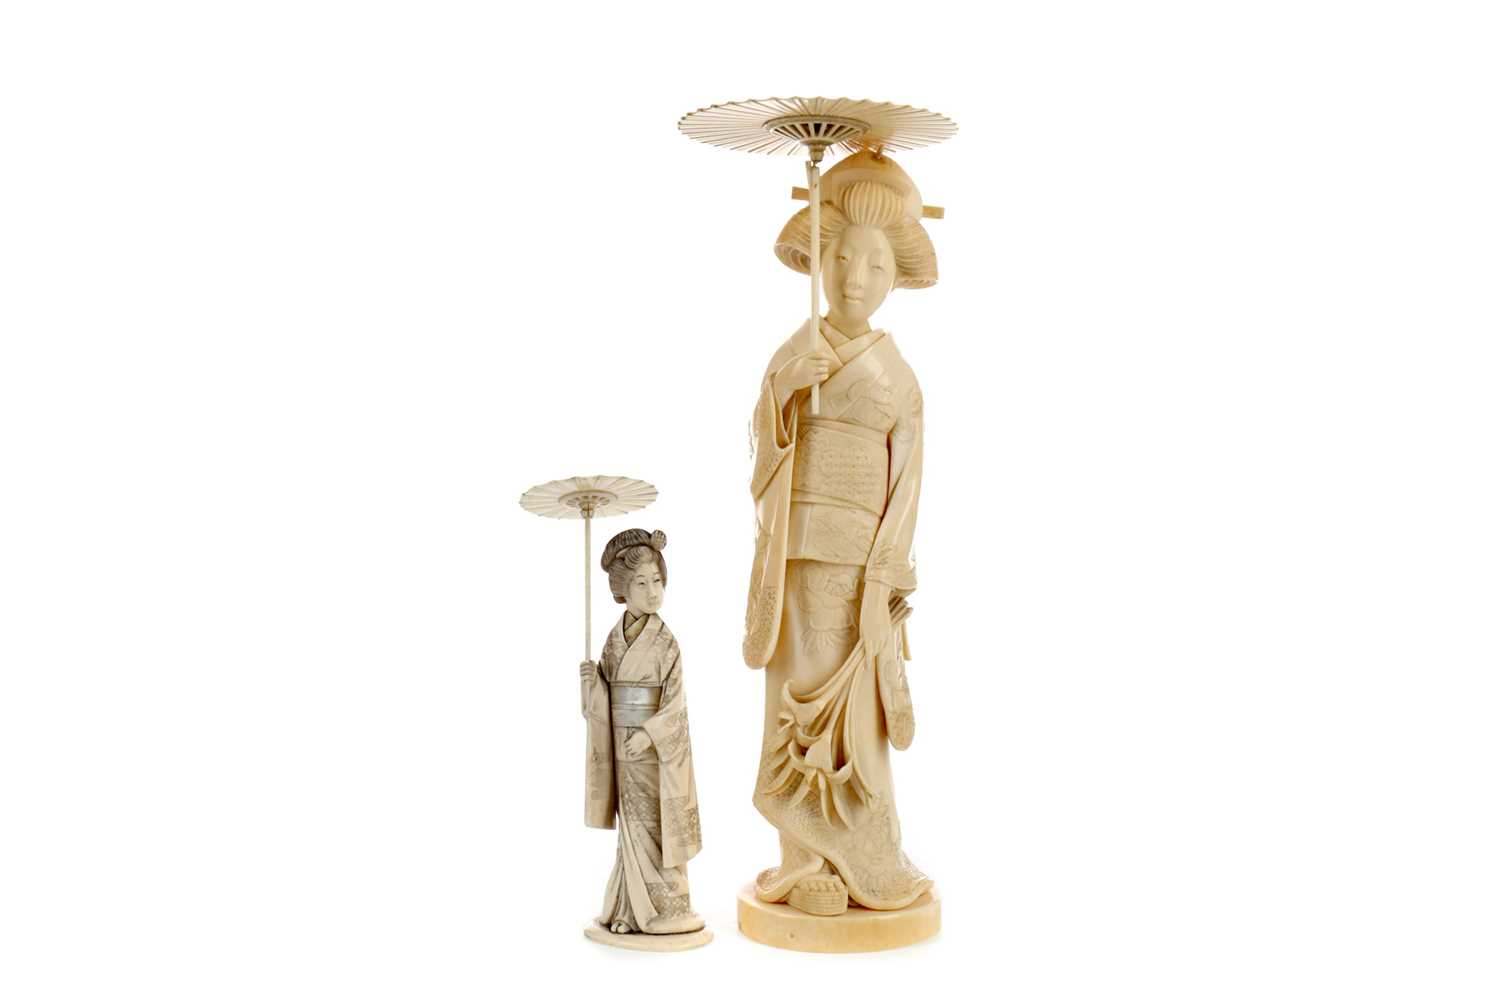 Lot 885 - AN EARLY 20TH CENTURY JAPANESE CARVING OF A GEISHA AND ANOTHER